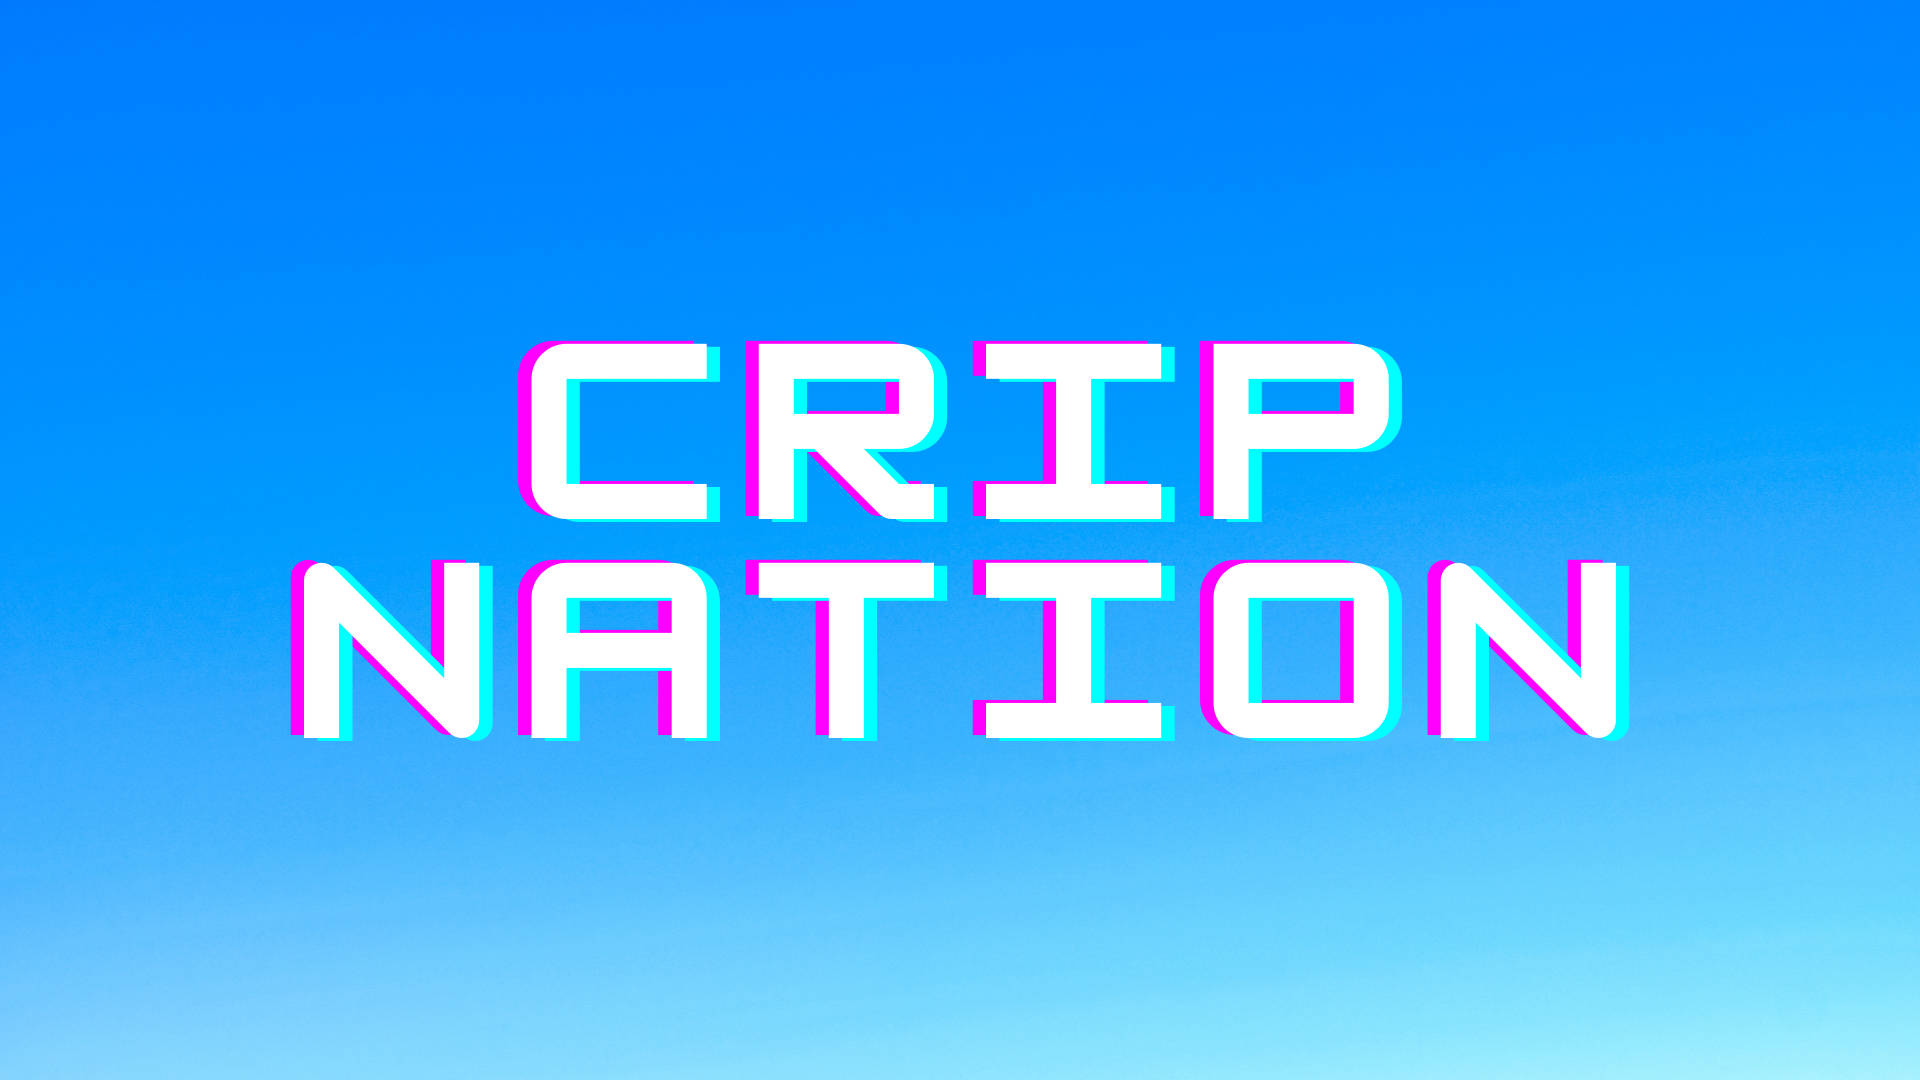 Crip Nation Retro Wave Poster Background